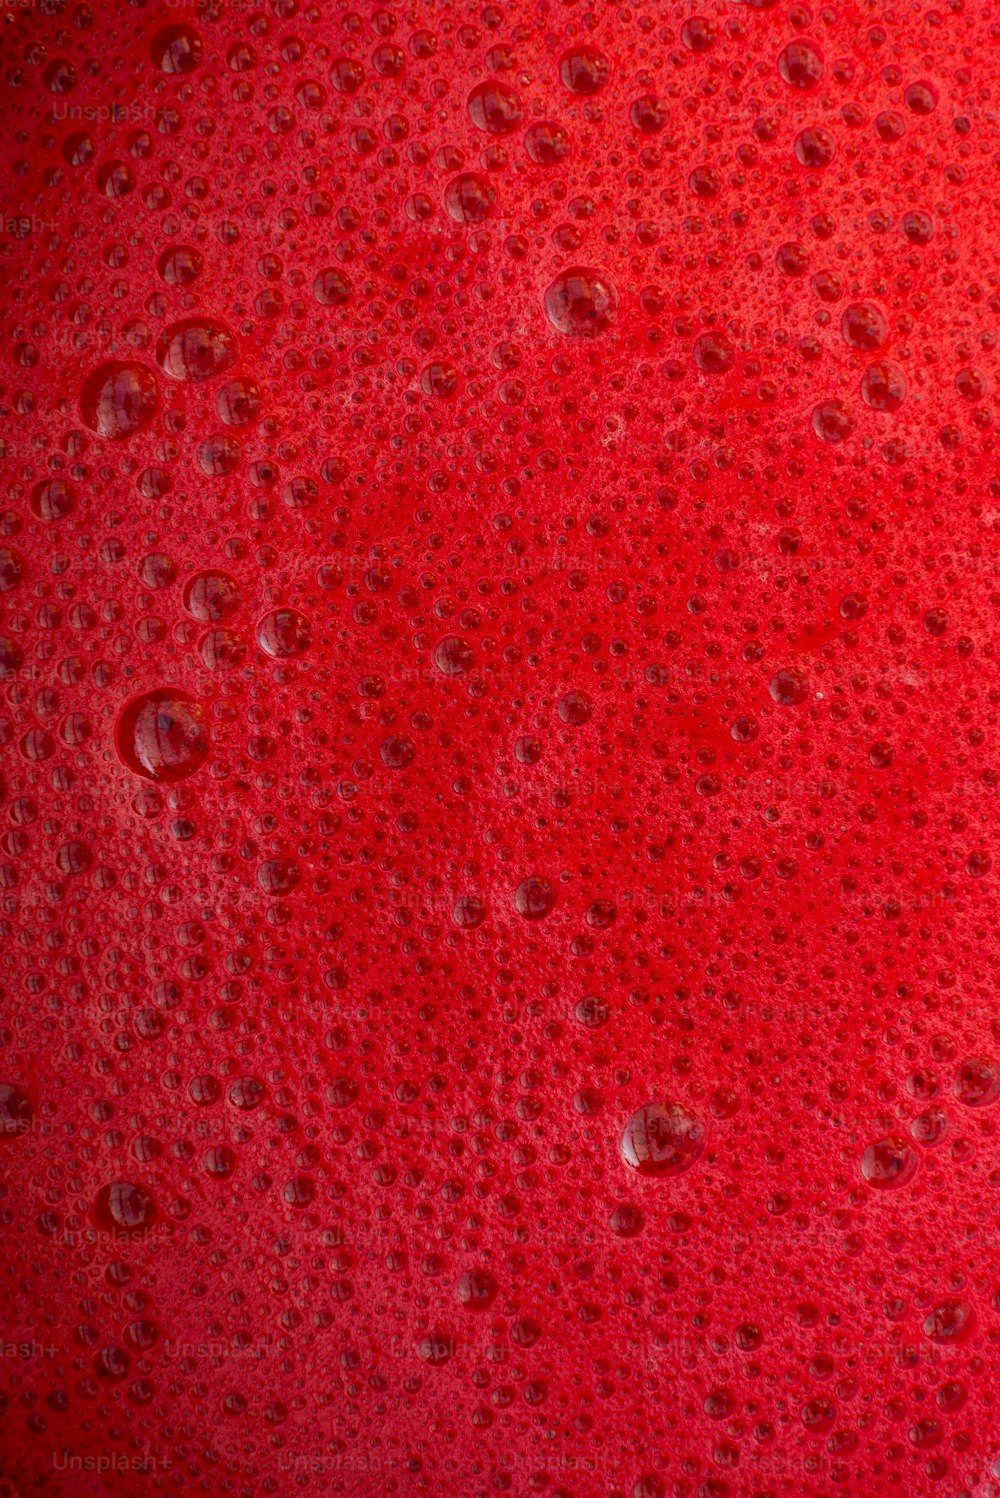 a close up of a red substance with drops of water